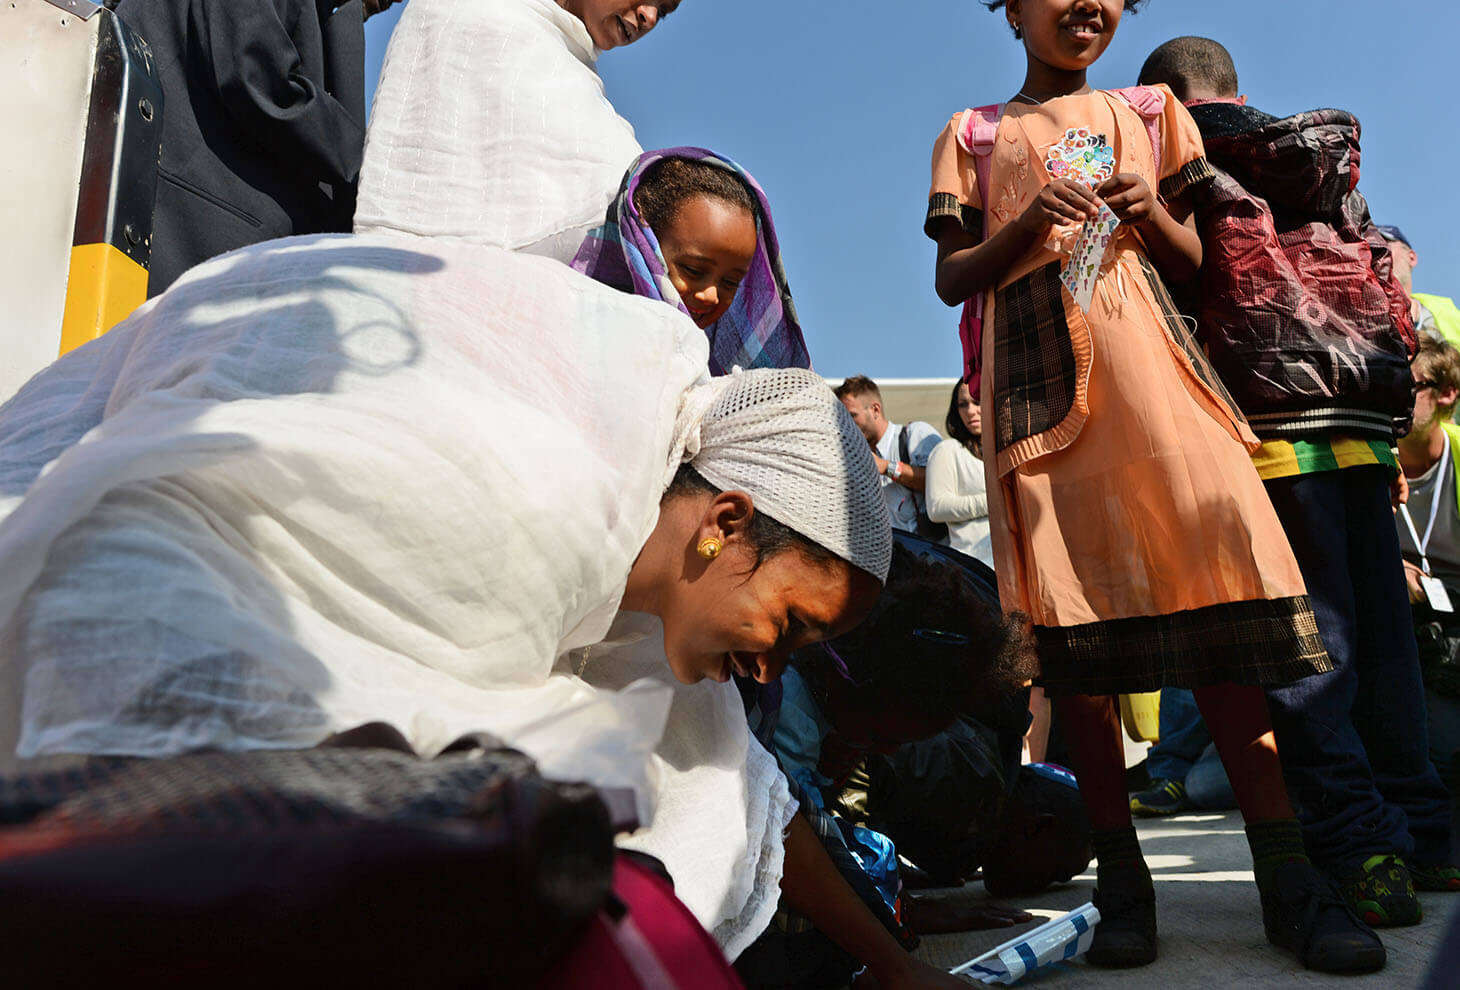 New Jewish immigrants from Ethiopia land at Ben Gurion Airport and bend down to kiss the ground in honor of their arrival in the land of Israel. Photo: Kobi Gideon, GPO